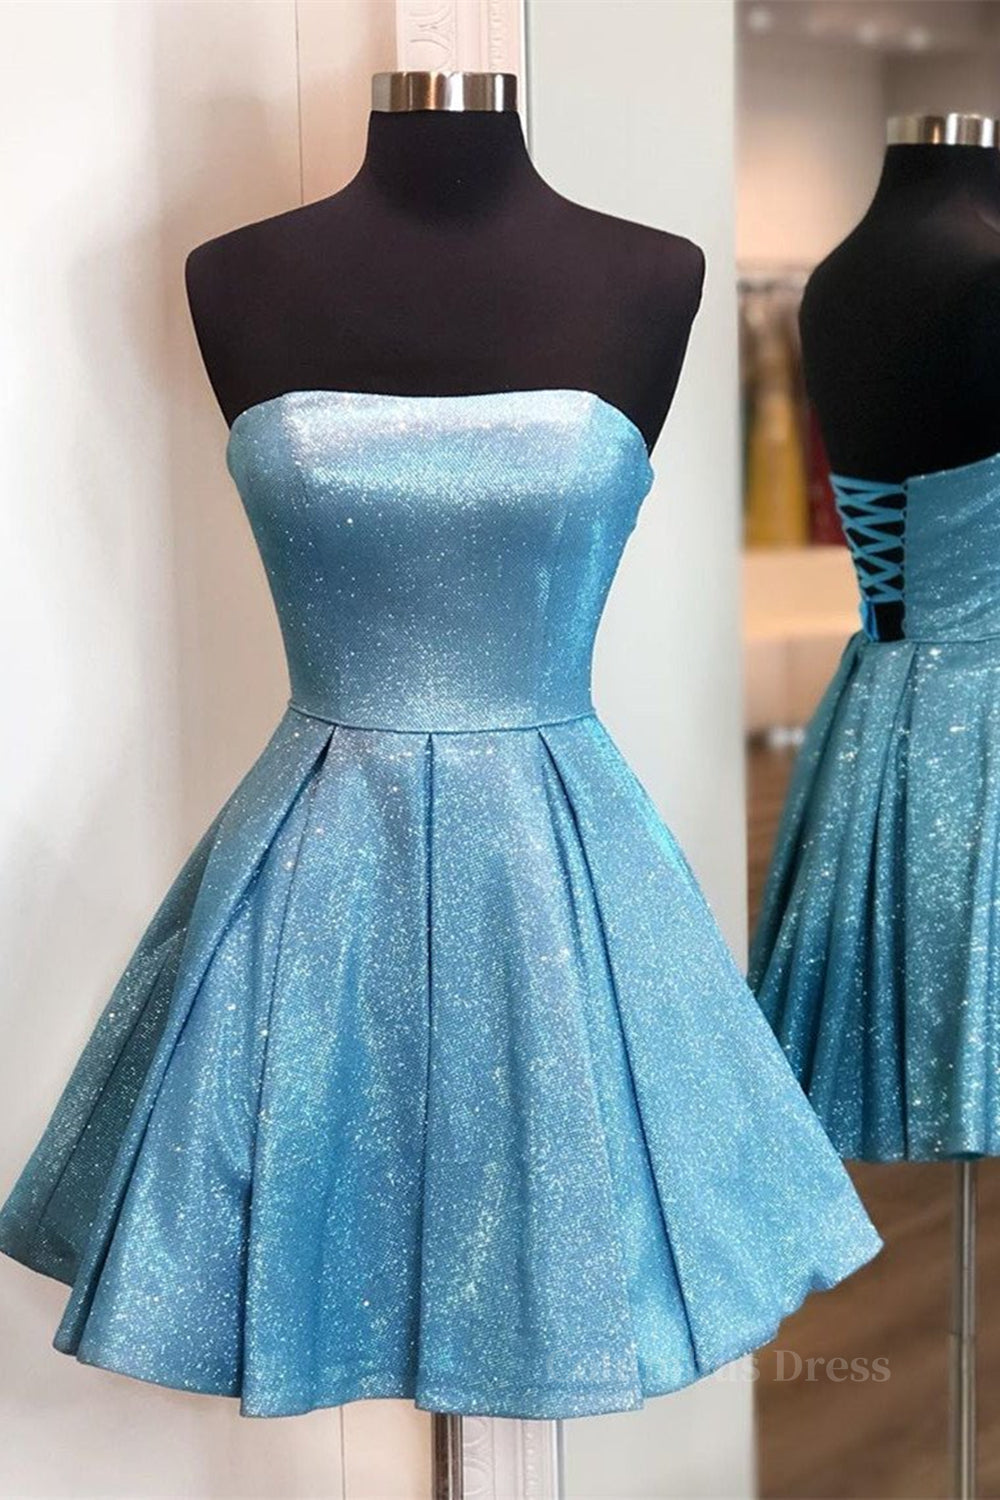 Classy Outfit Women, Shiny Strapless Blue Short Prom Dresses, Open Back Blue Homecoming Dresses, Blue Formal Evening Dresses